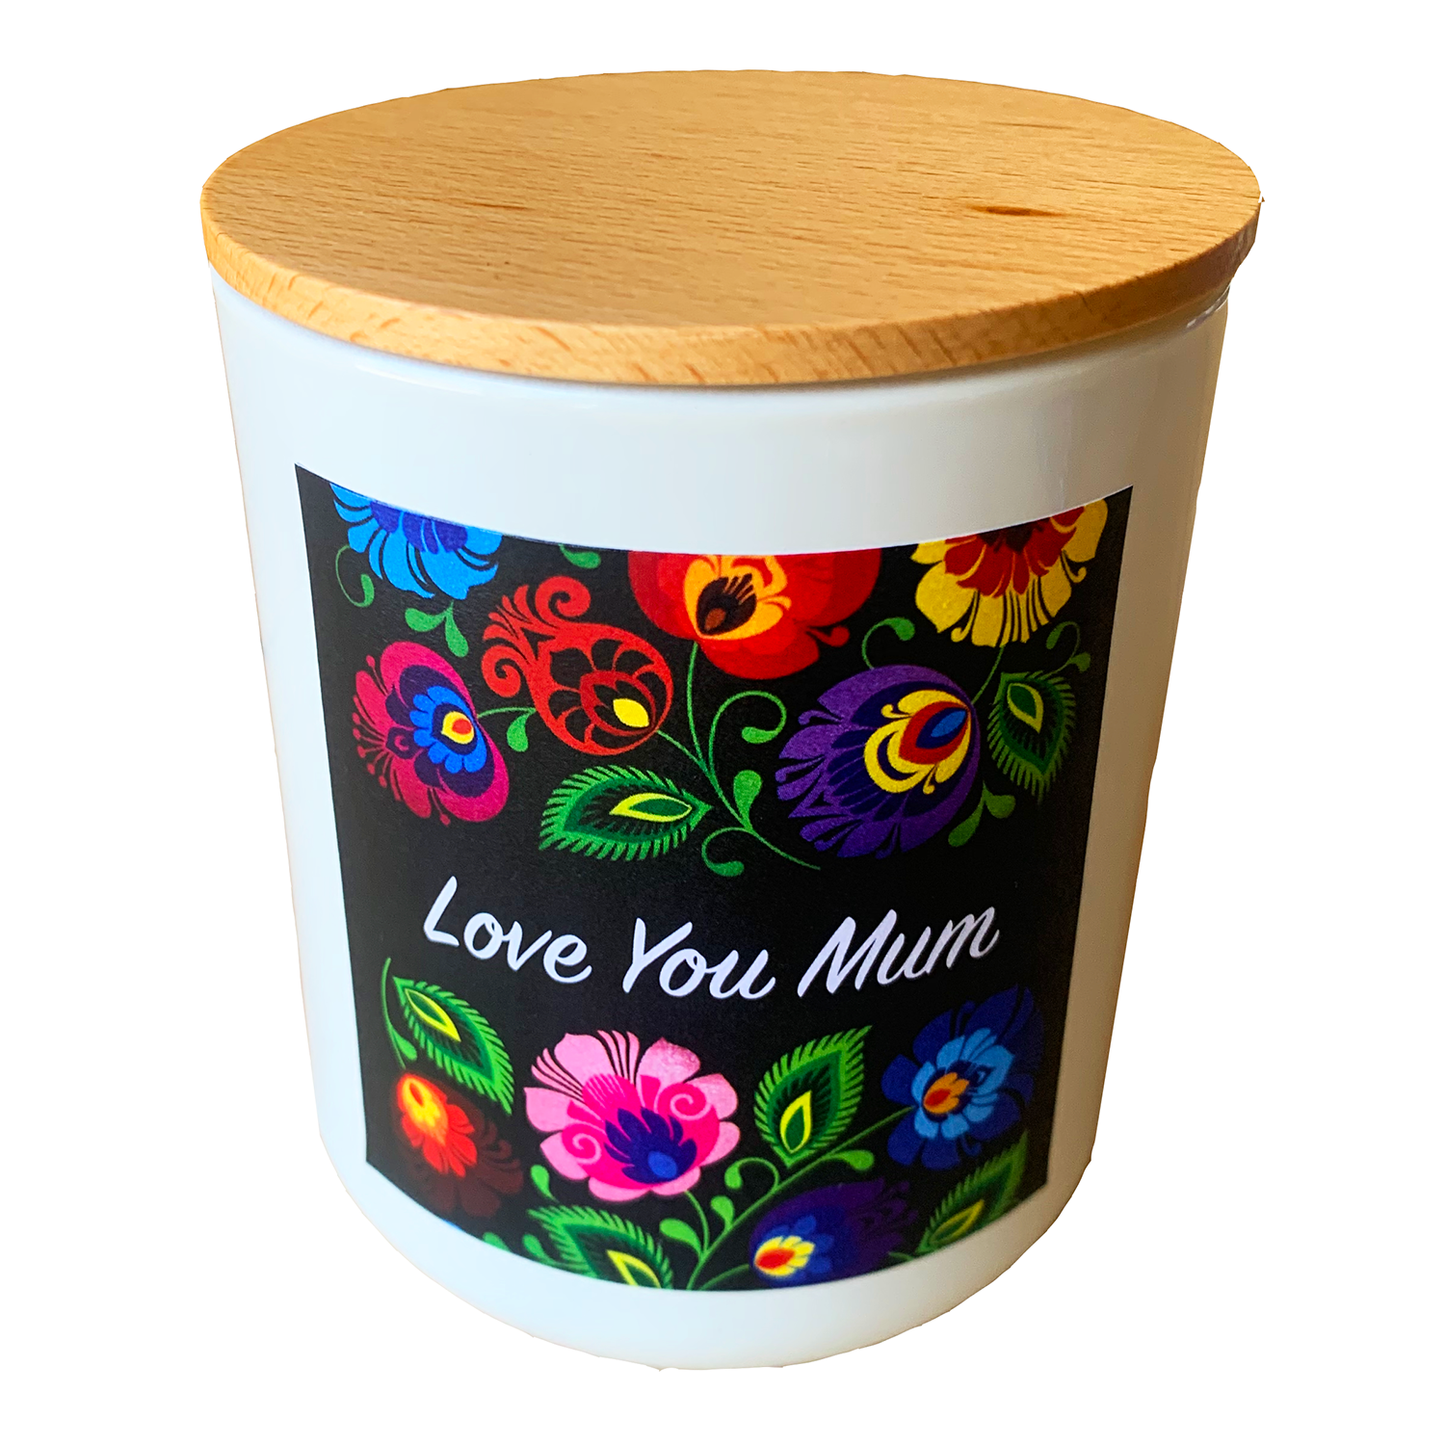 Hunter Gatherer / Pure soy wax shell candle / LOVE YOU MUM / Boxed